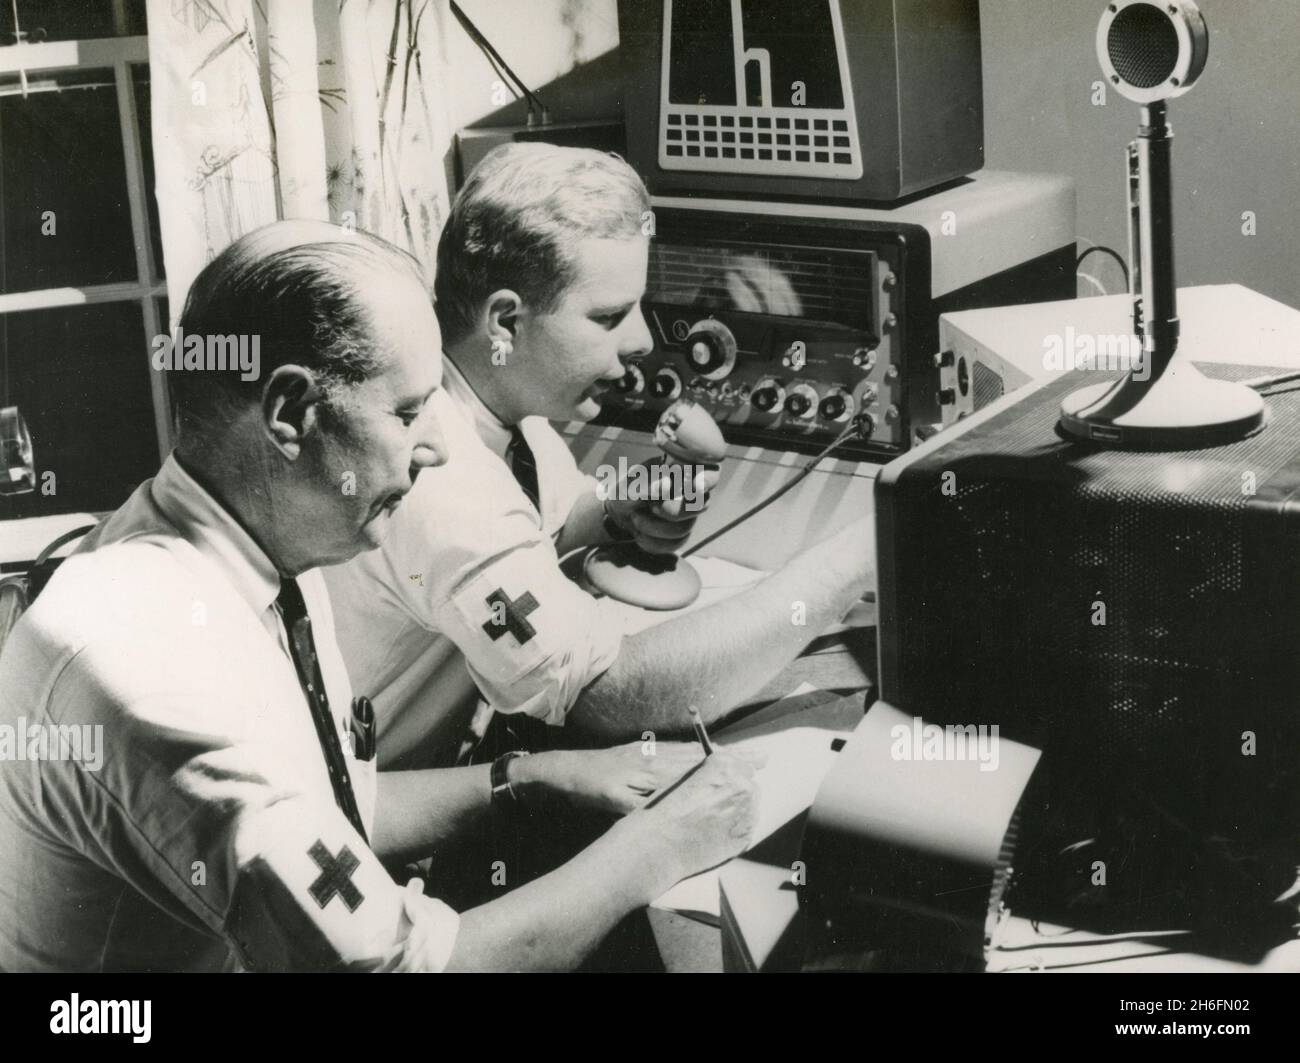 Amateur radio operators serving as volunteers for the American Red Cross, Providence, Rhode Island, USA 1964 Stock Photo